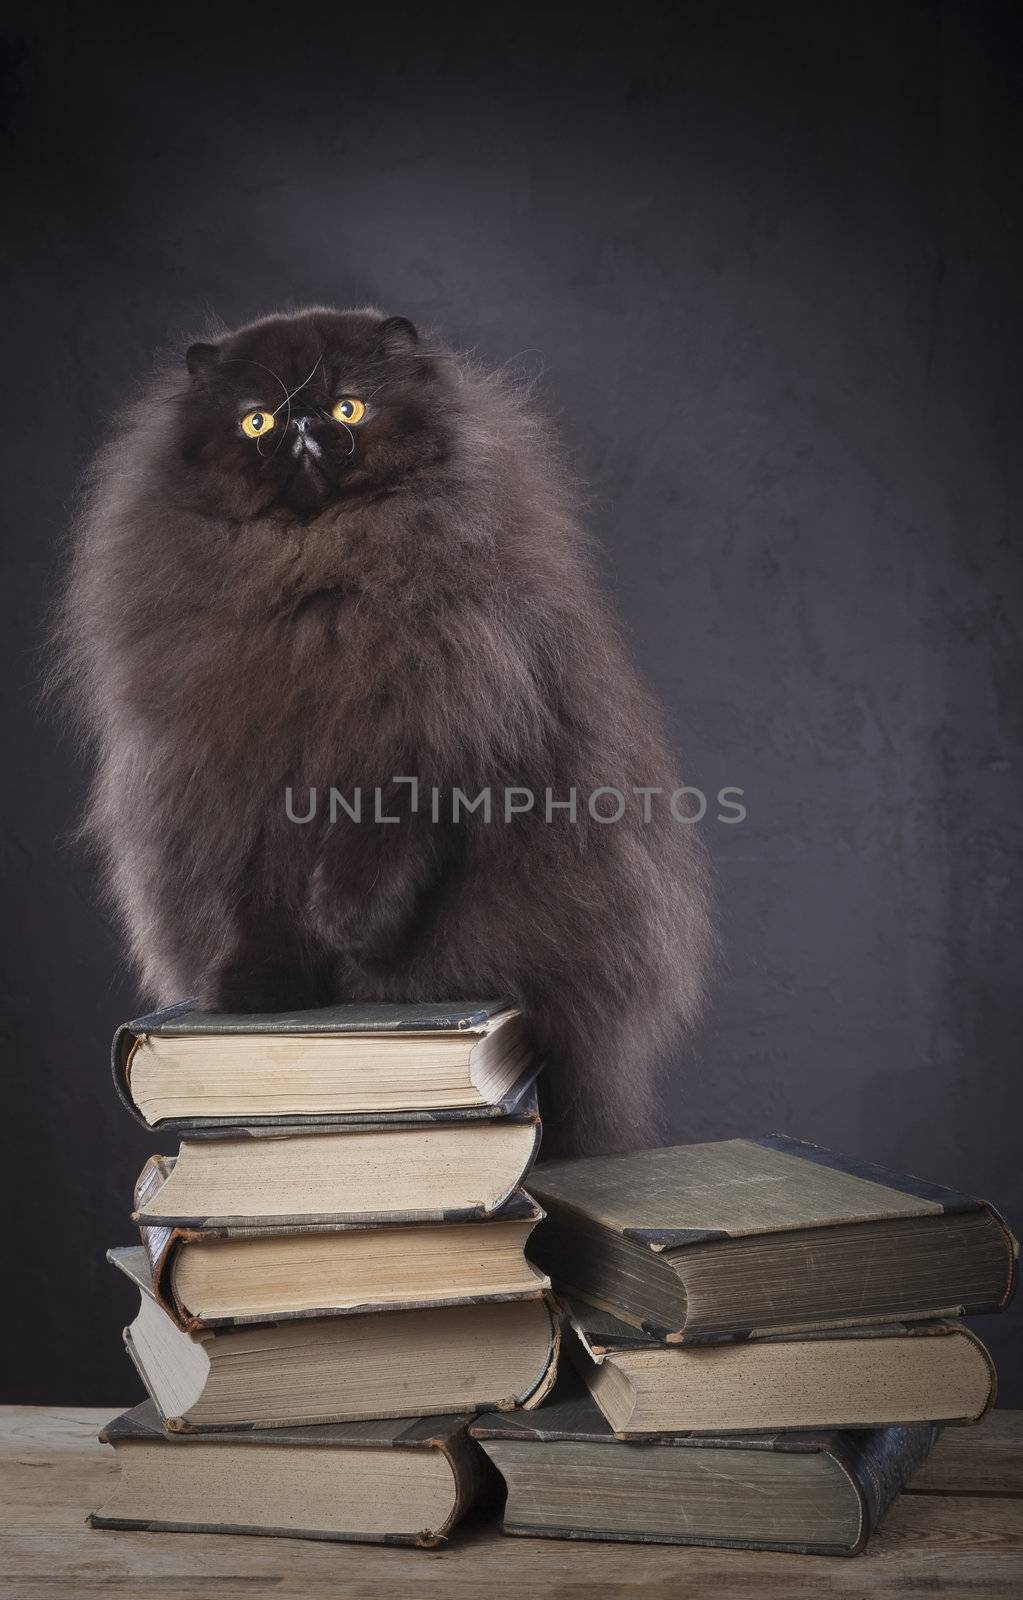 Long haired (persian) cat on the top of book pile